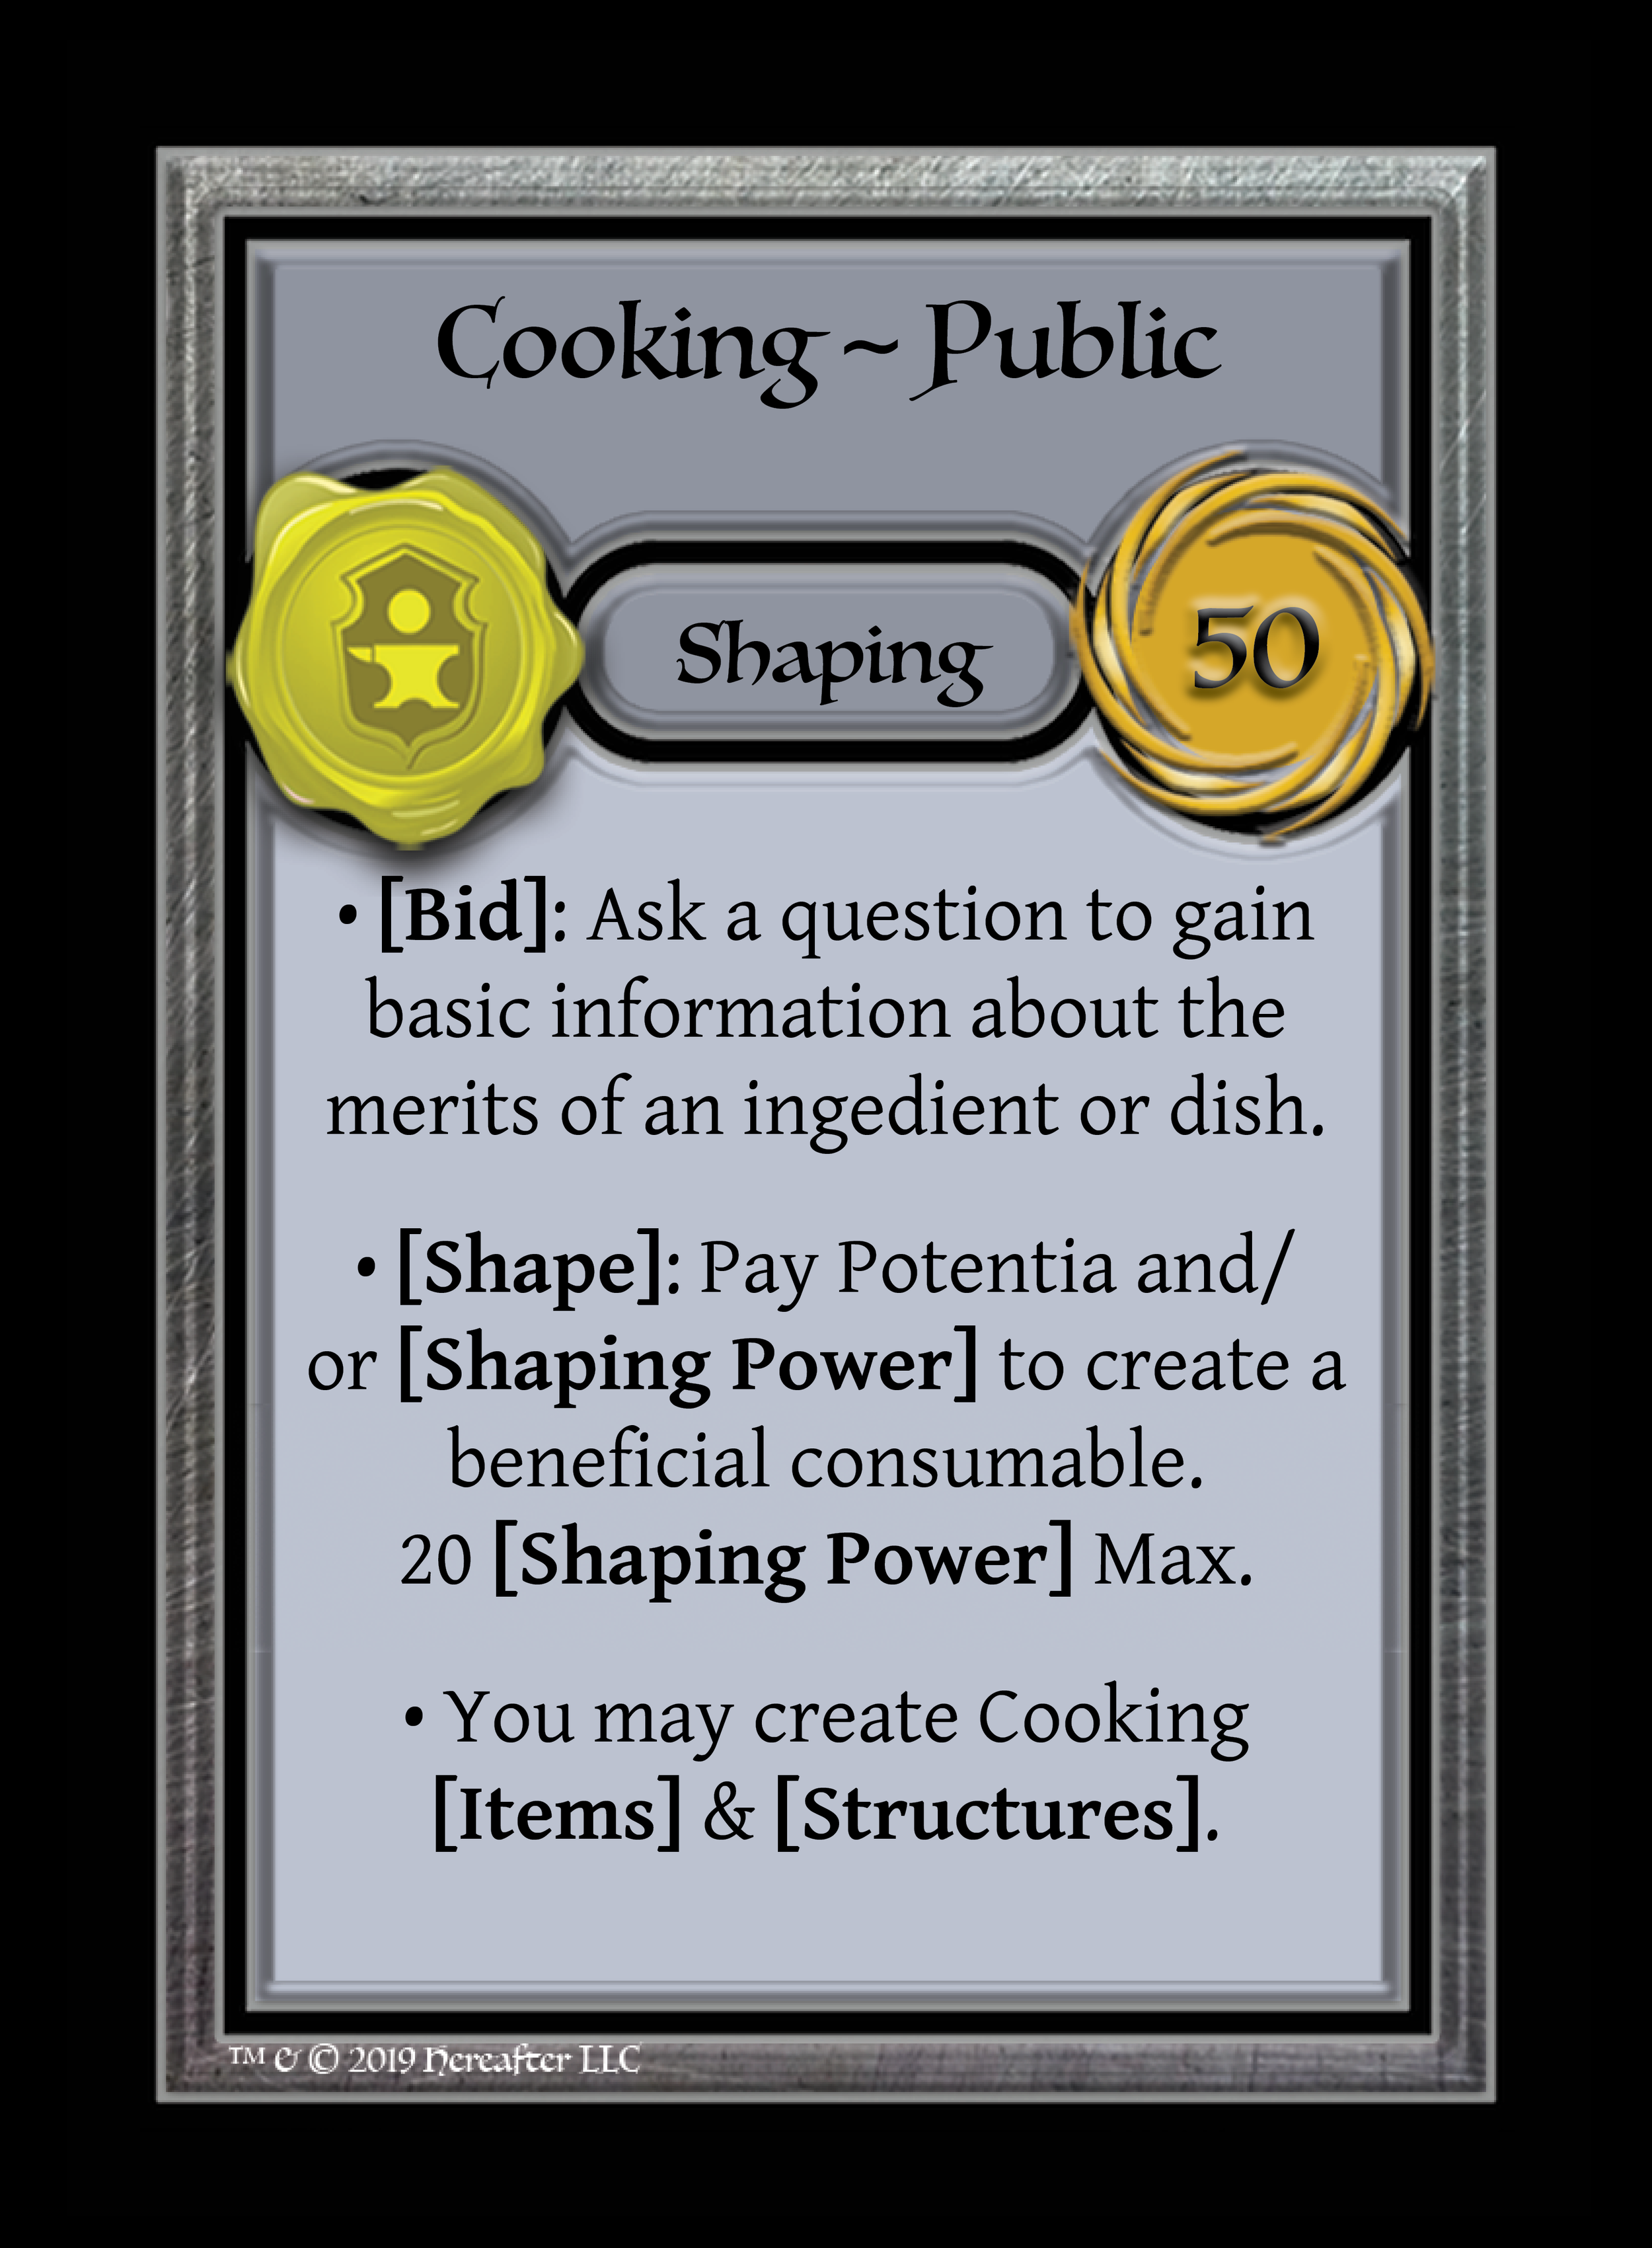 245_Shaping_Cooking ~ Public_().png